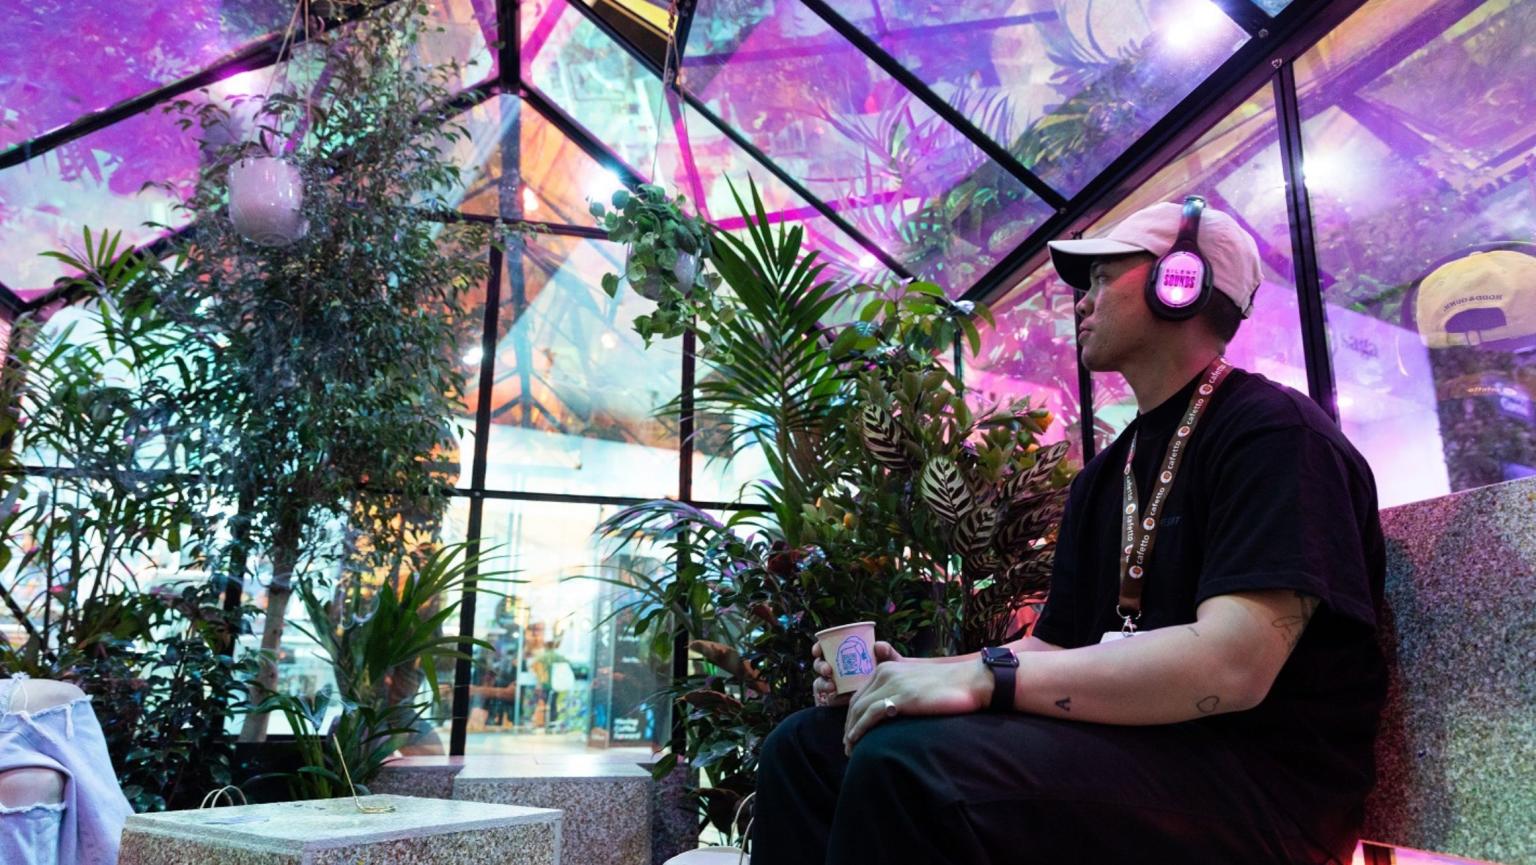 A man sitting with headphones on in a colour glass house with plants around. 